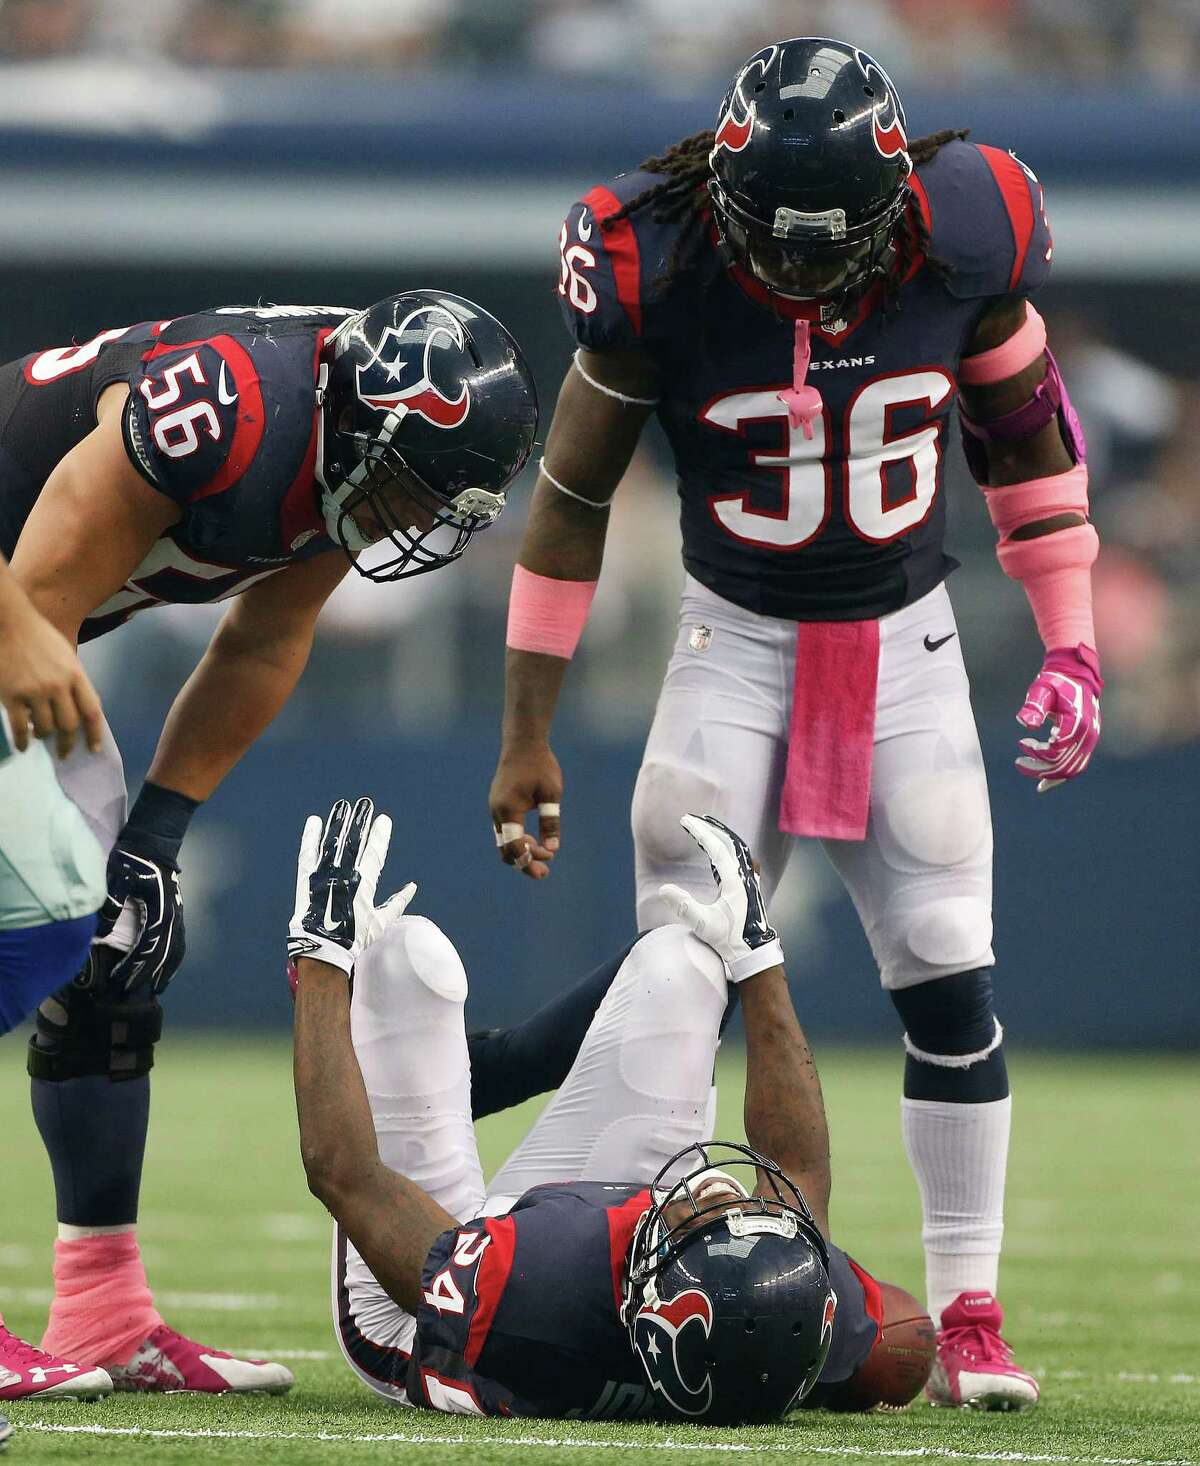 Houston Texans cornerback Johnathan Joseph (24) lies on the ground injured as Brian Cushing (56) and D.J. Swearinger (36) check on him during the third quarter of an NFL football game at AT&T Stadium, Sunday, Oct. 5, 2014, in Arlington. ( Karen Warren / Houston Chronicle )